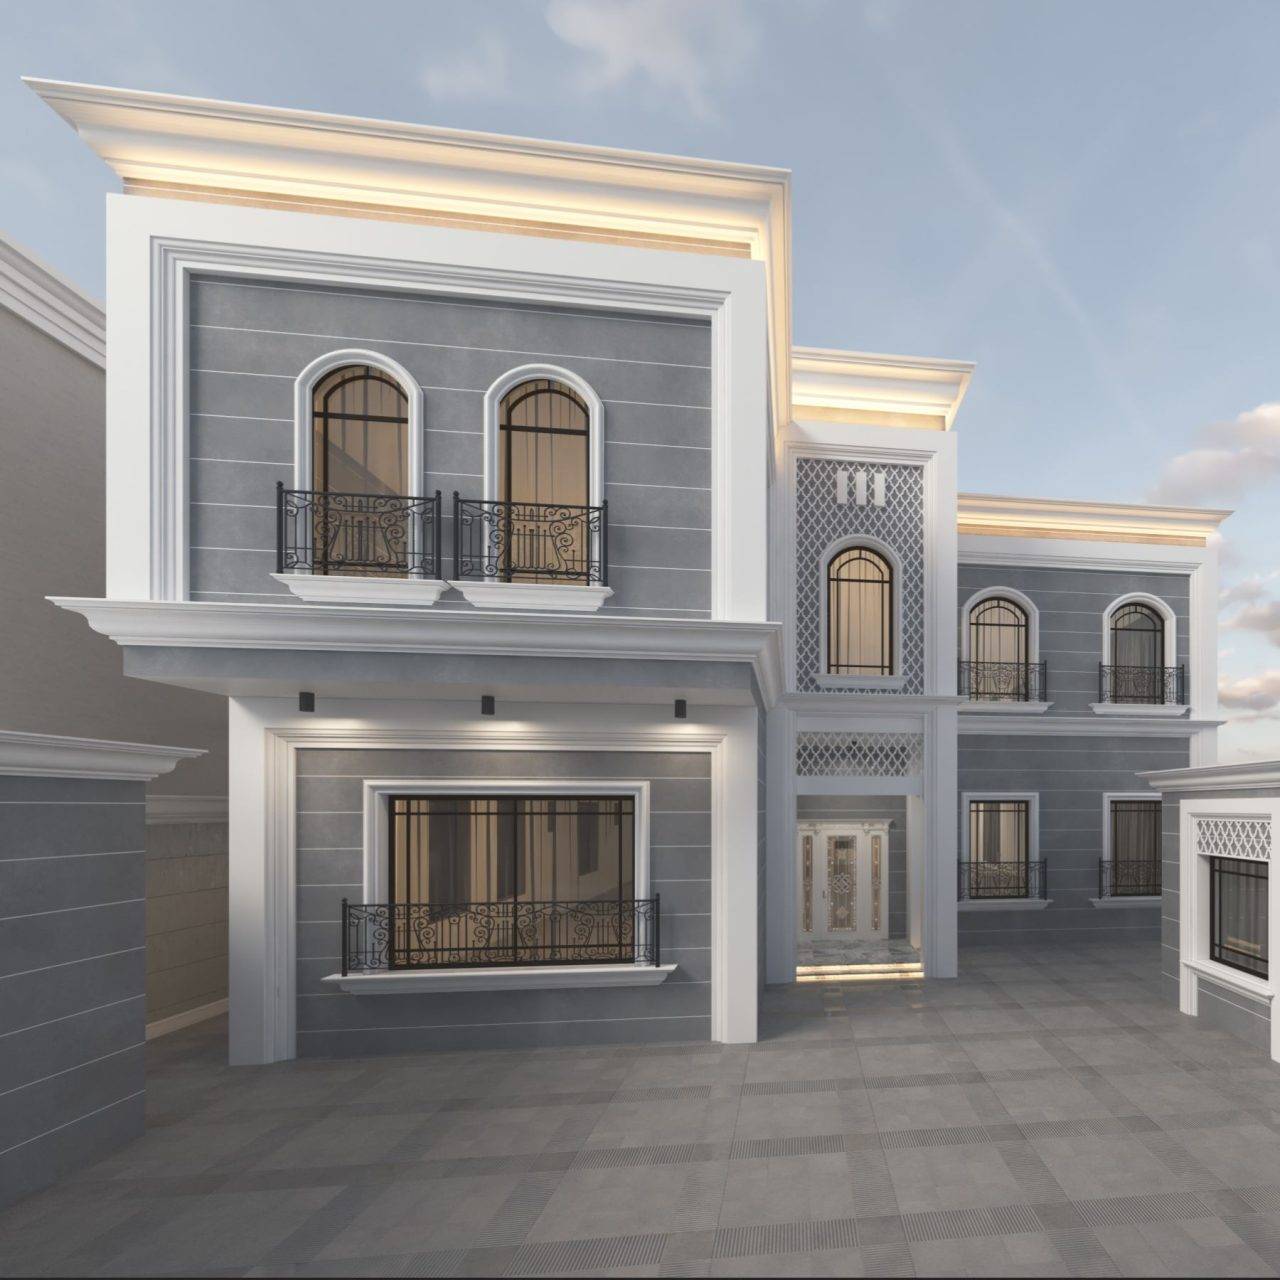 House Facade With Simple Ornaments Project